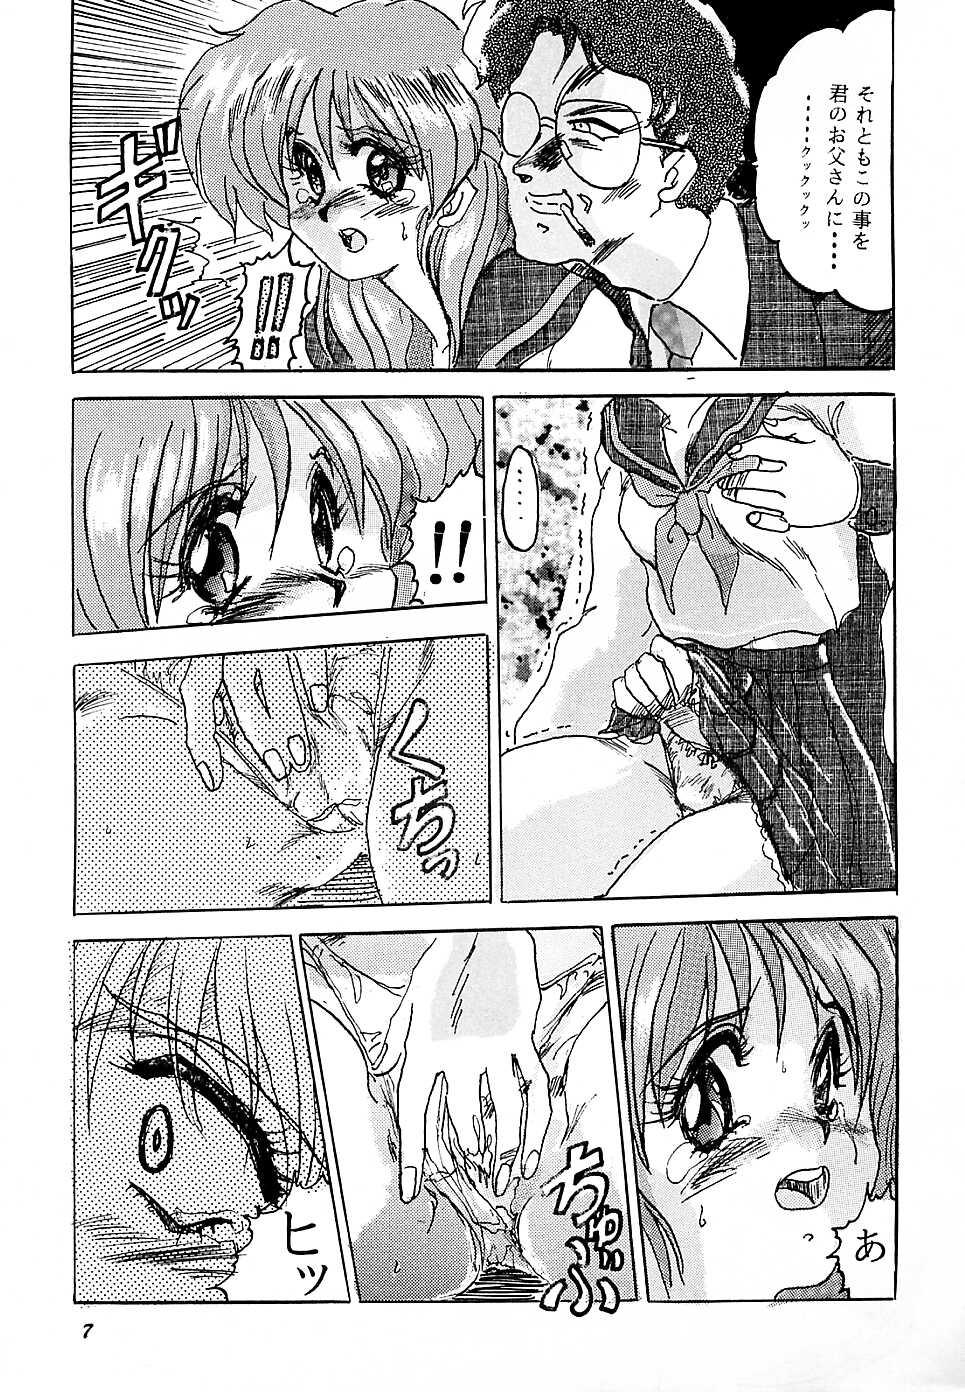 Butt Plug F 93C - Brave express might gaine This - Page 6